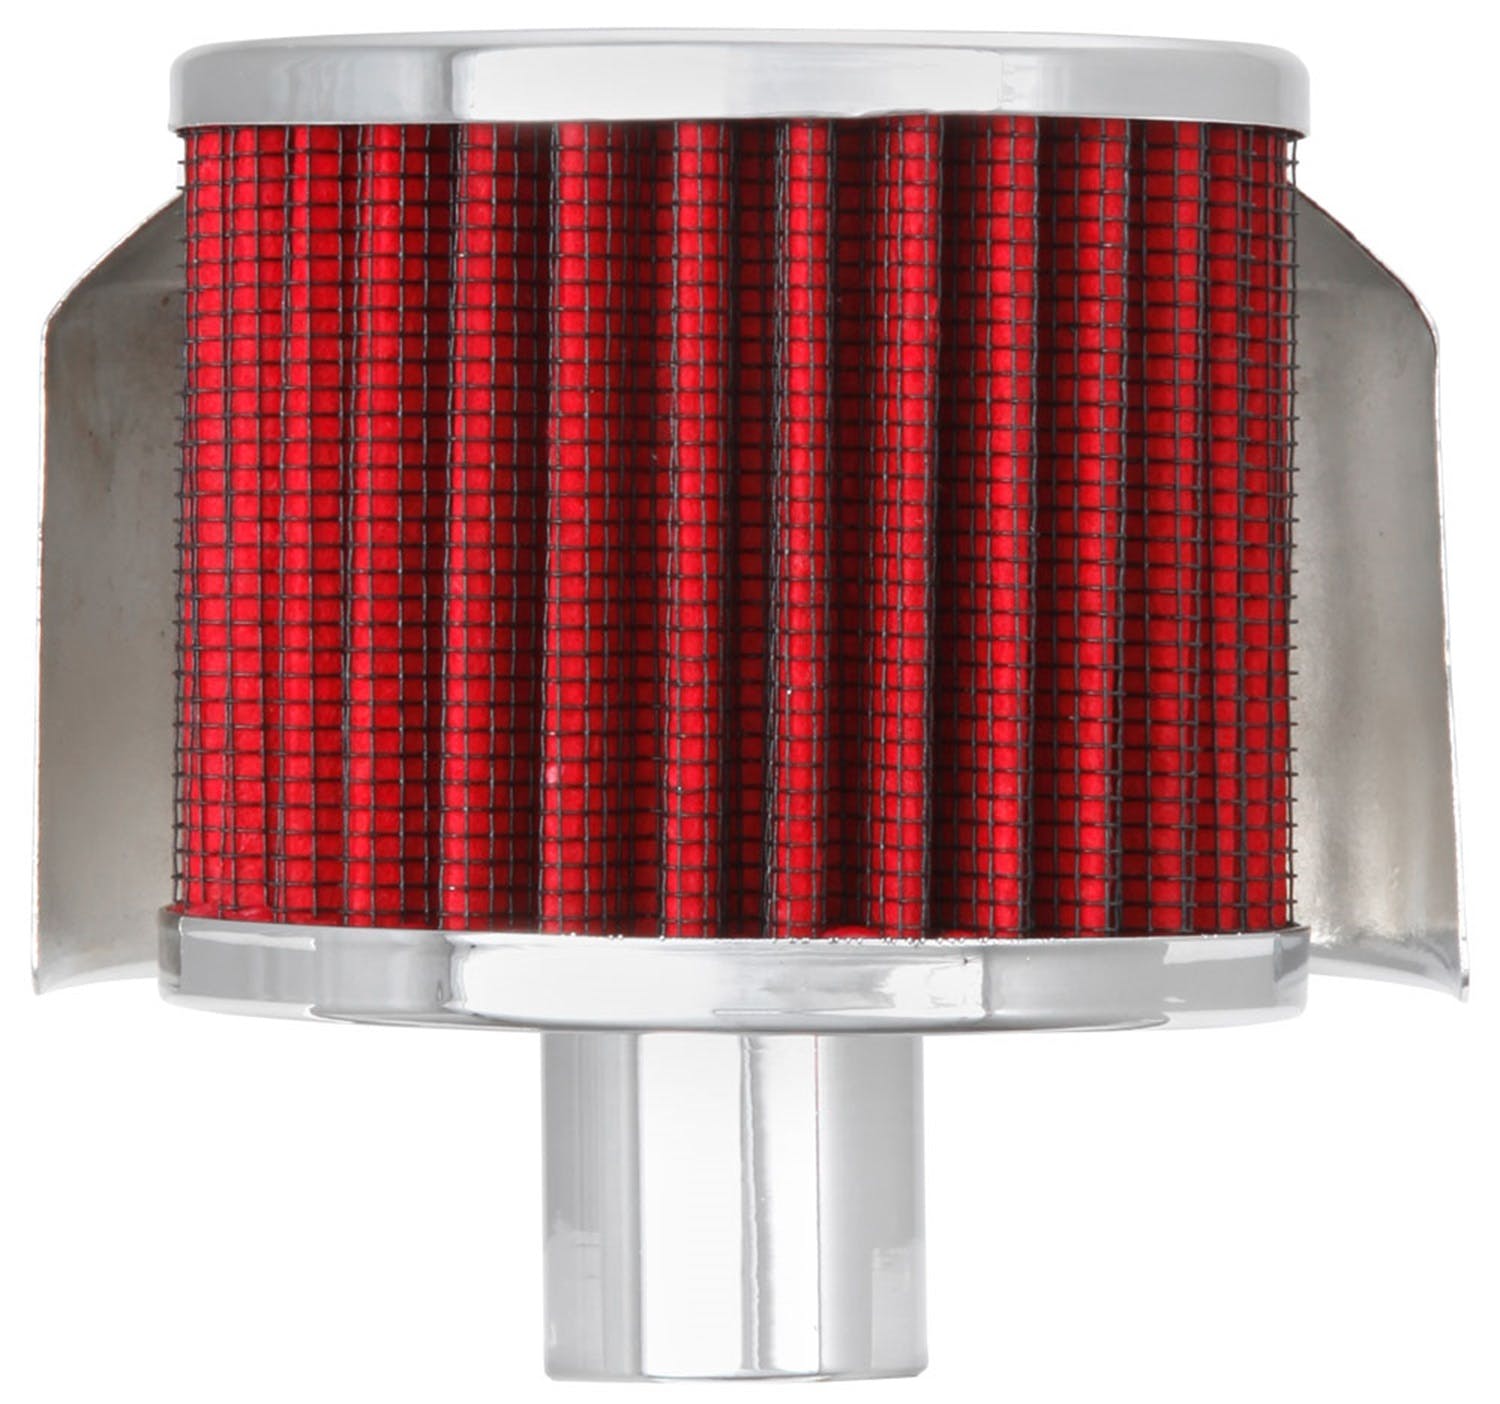 K&N 62-1520 Vent Air Filter/Breather